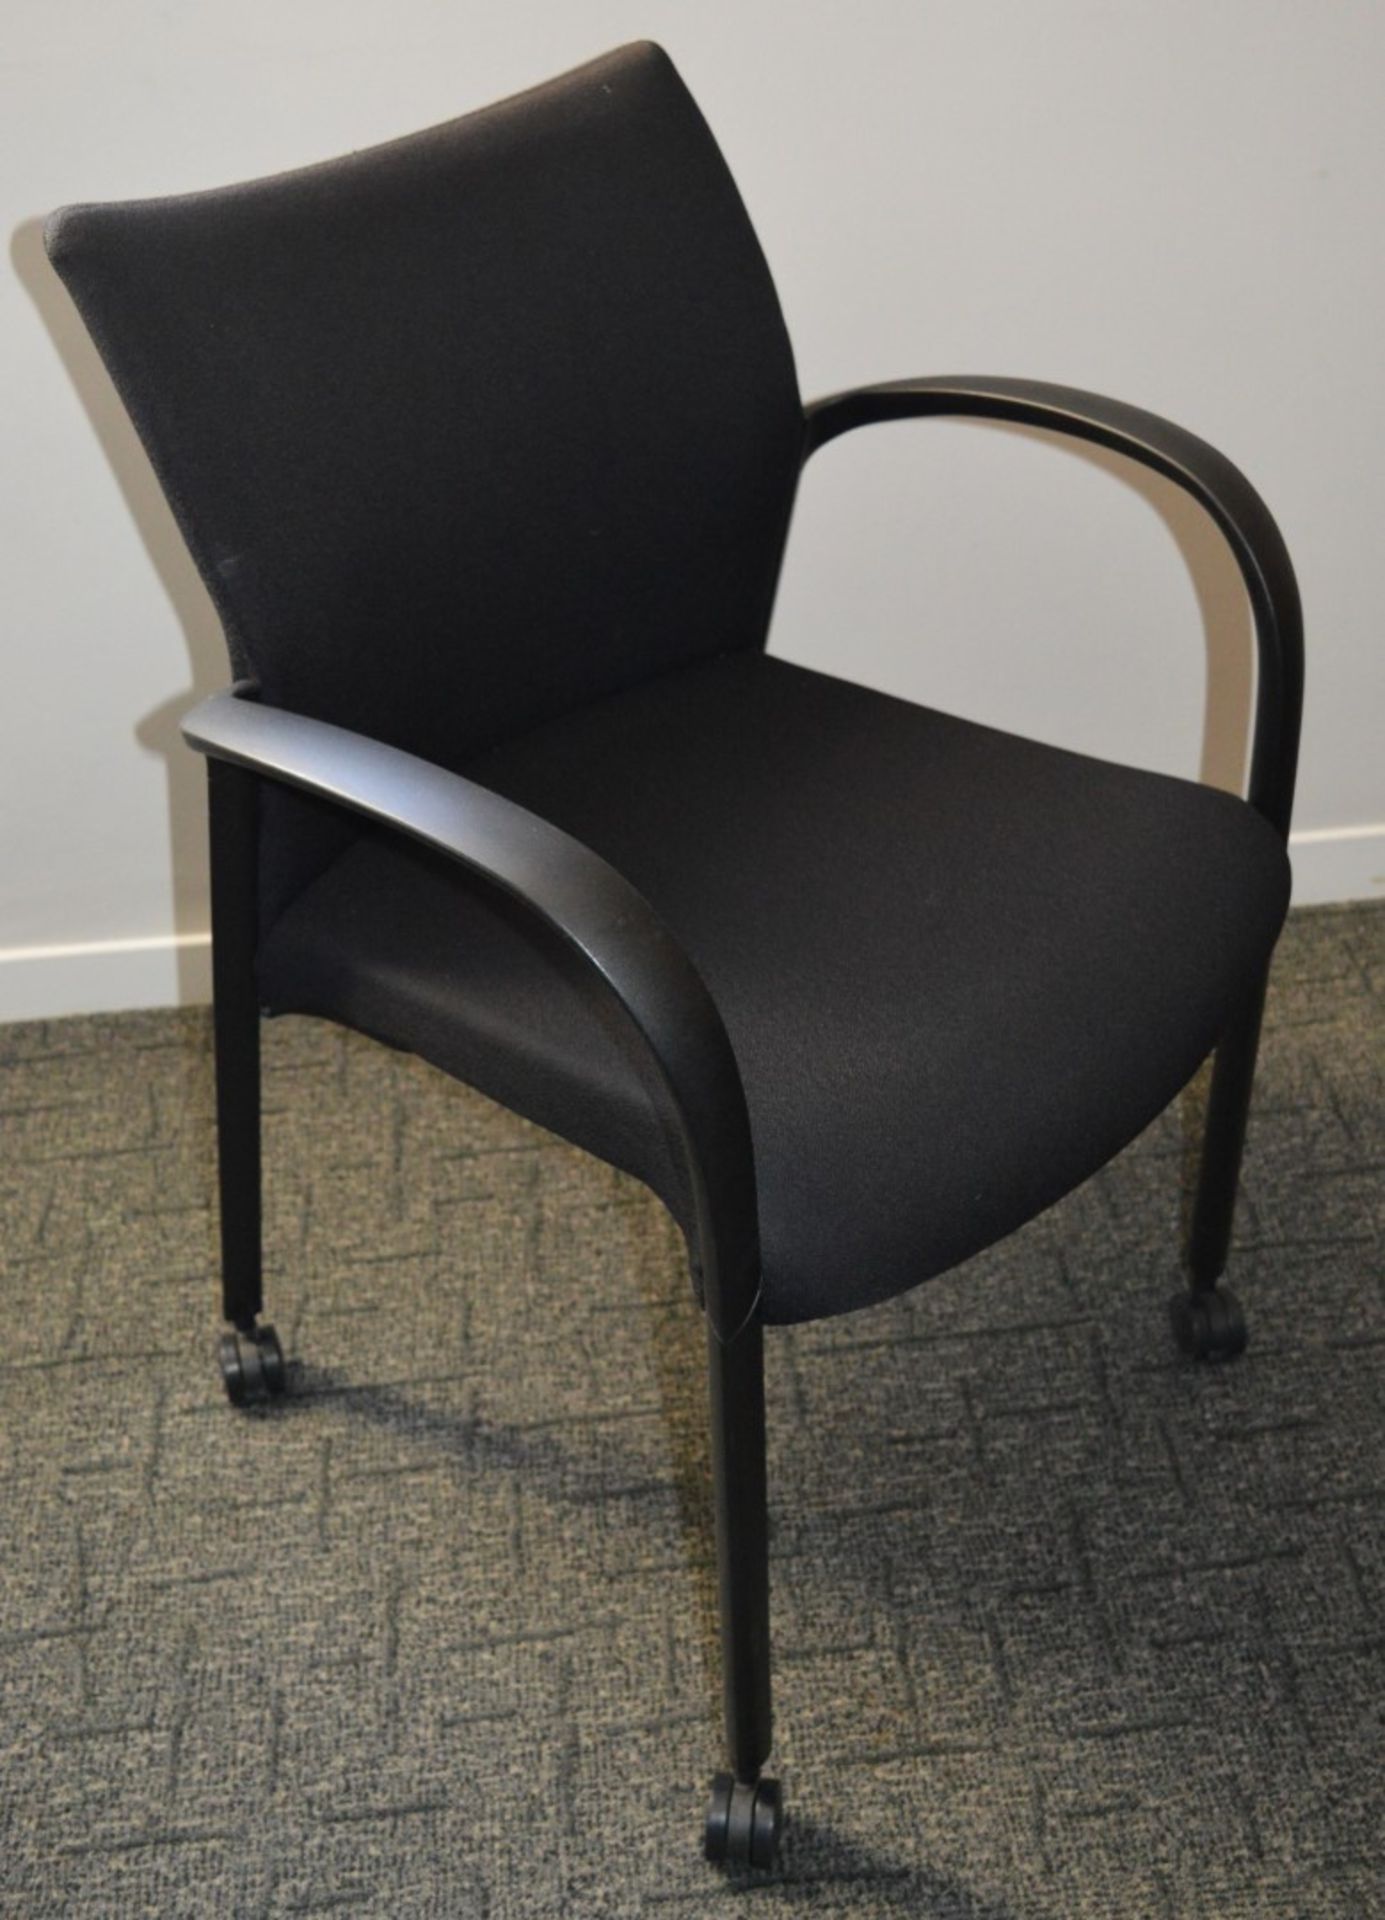 4 x Senator T117A Havana Extreme Office Chairs - Fully Upholstered With Black Frame, Arm Rests and - Image 2 of 6